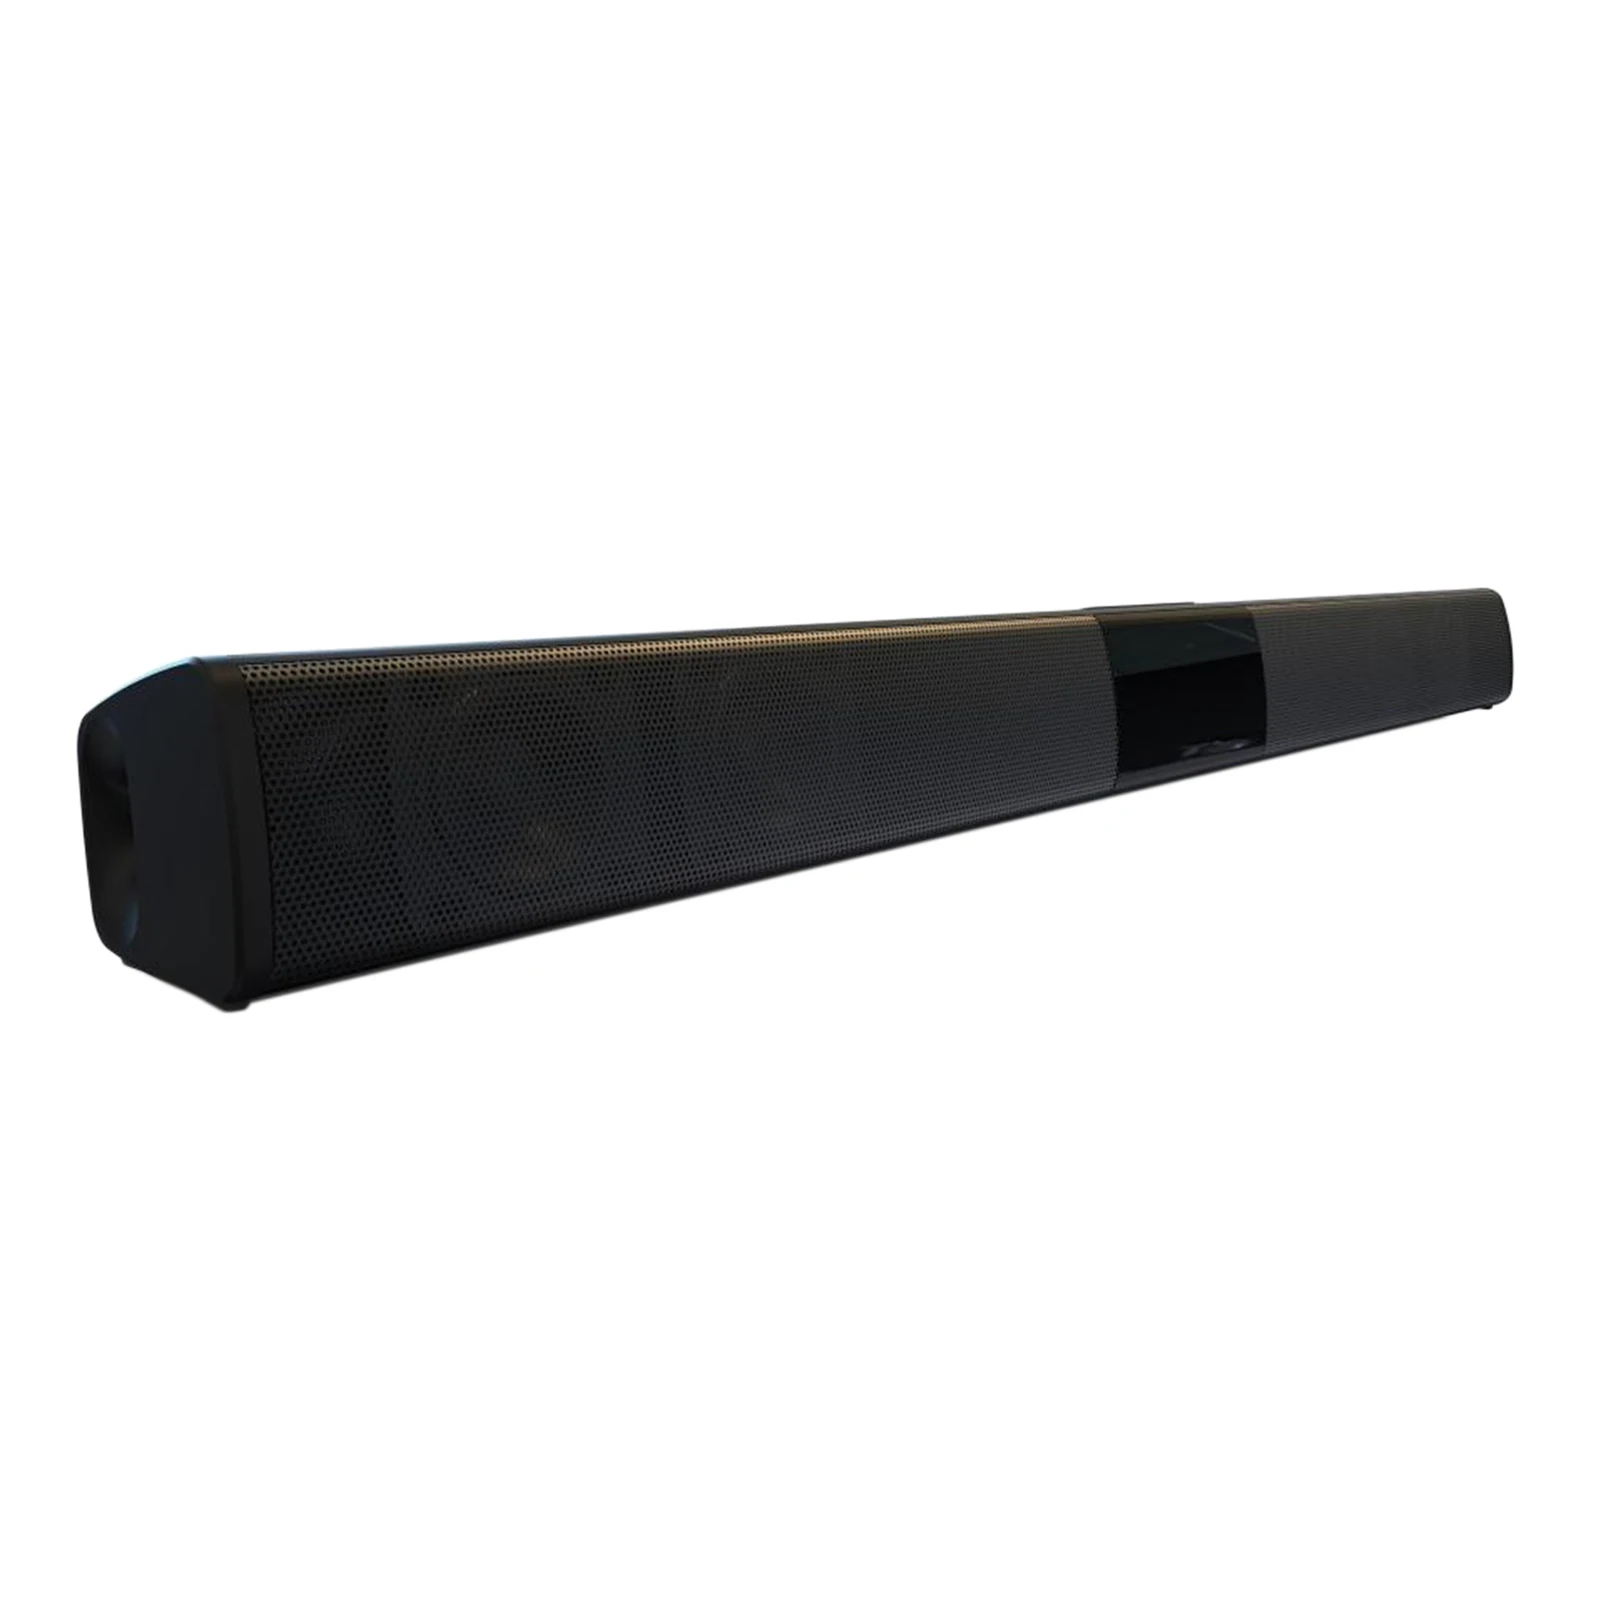 550mm Soundbar for TV Wired/Wireless Bluetooth Stereo Speaker with DSP technology, Multi-input